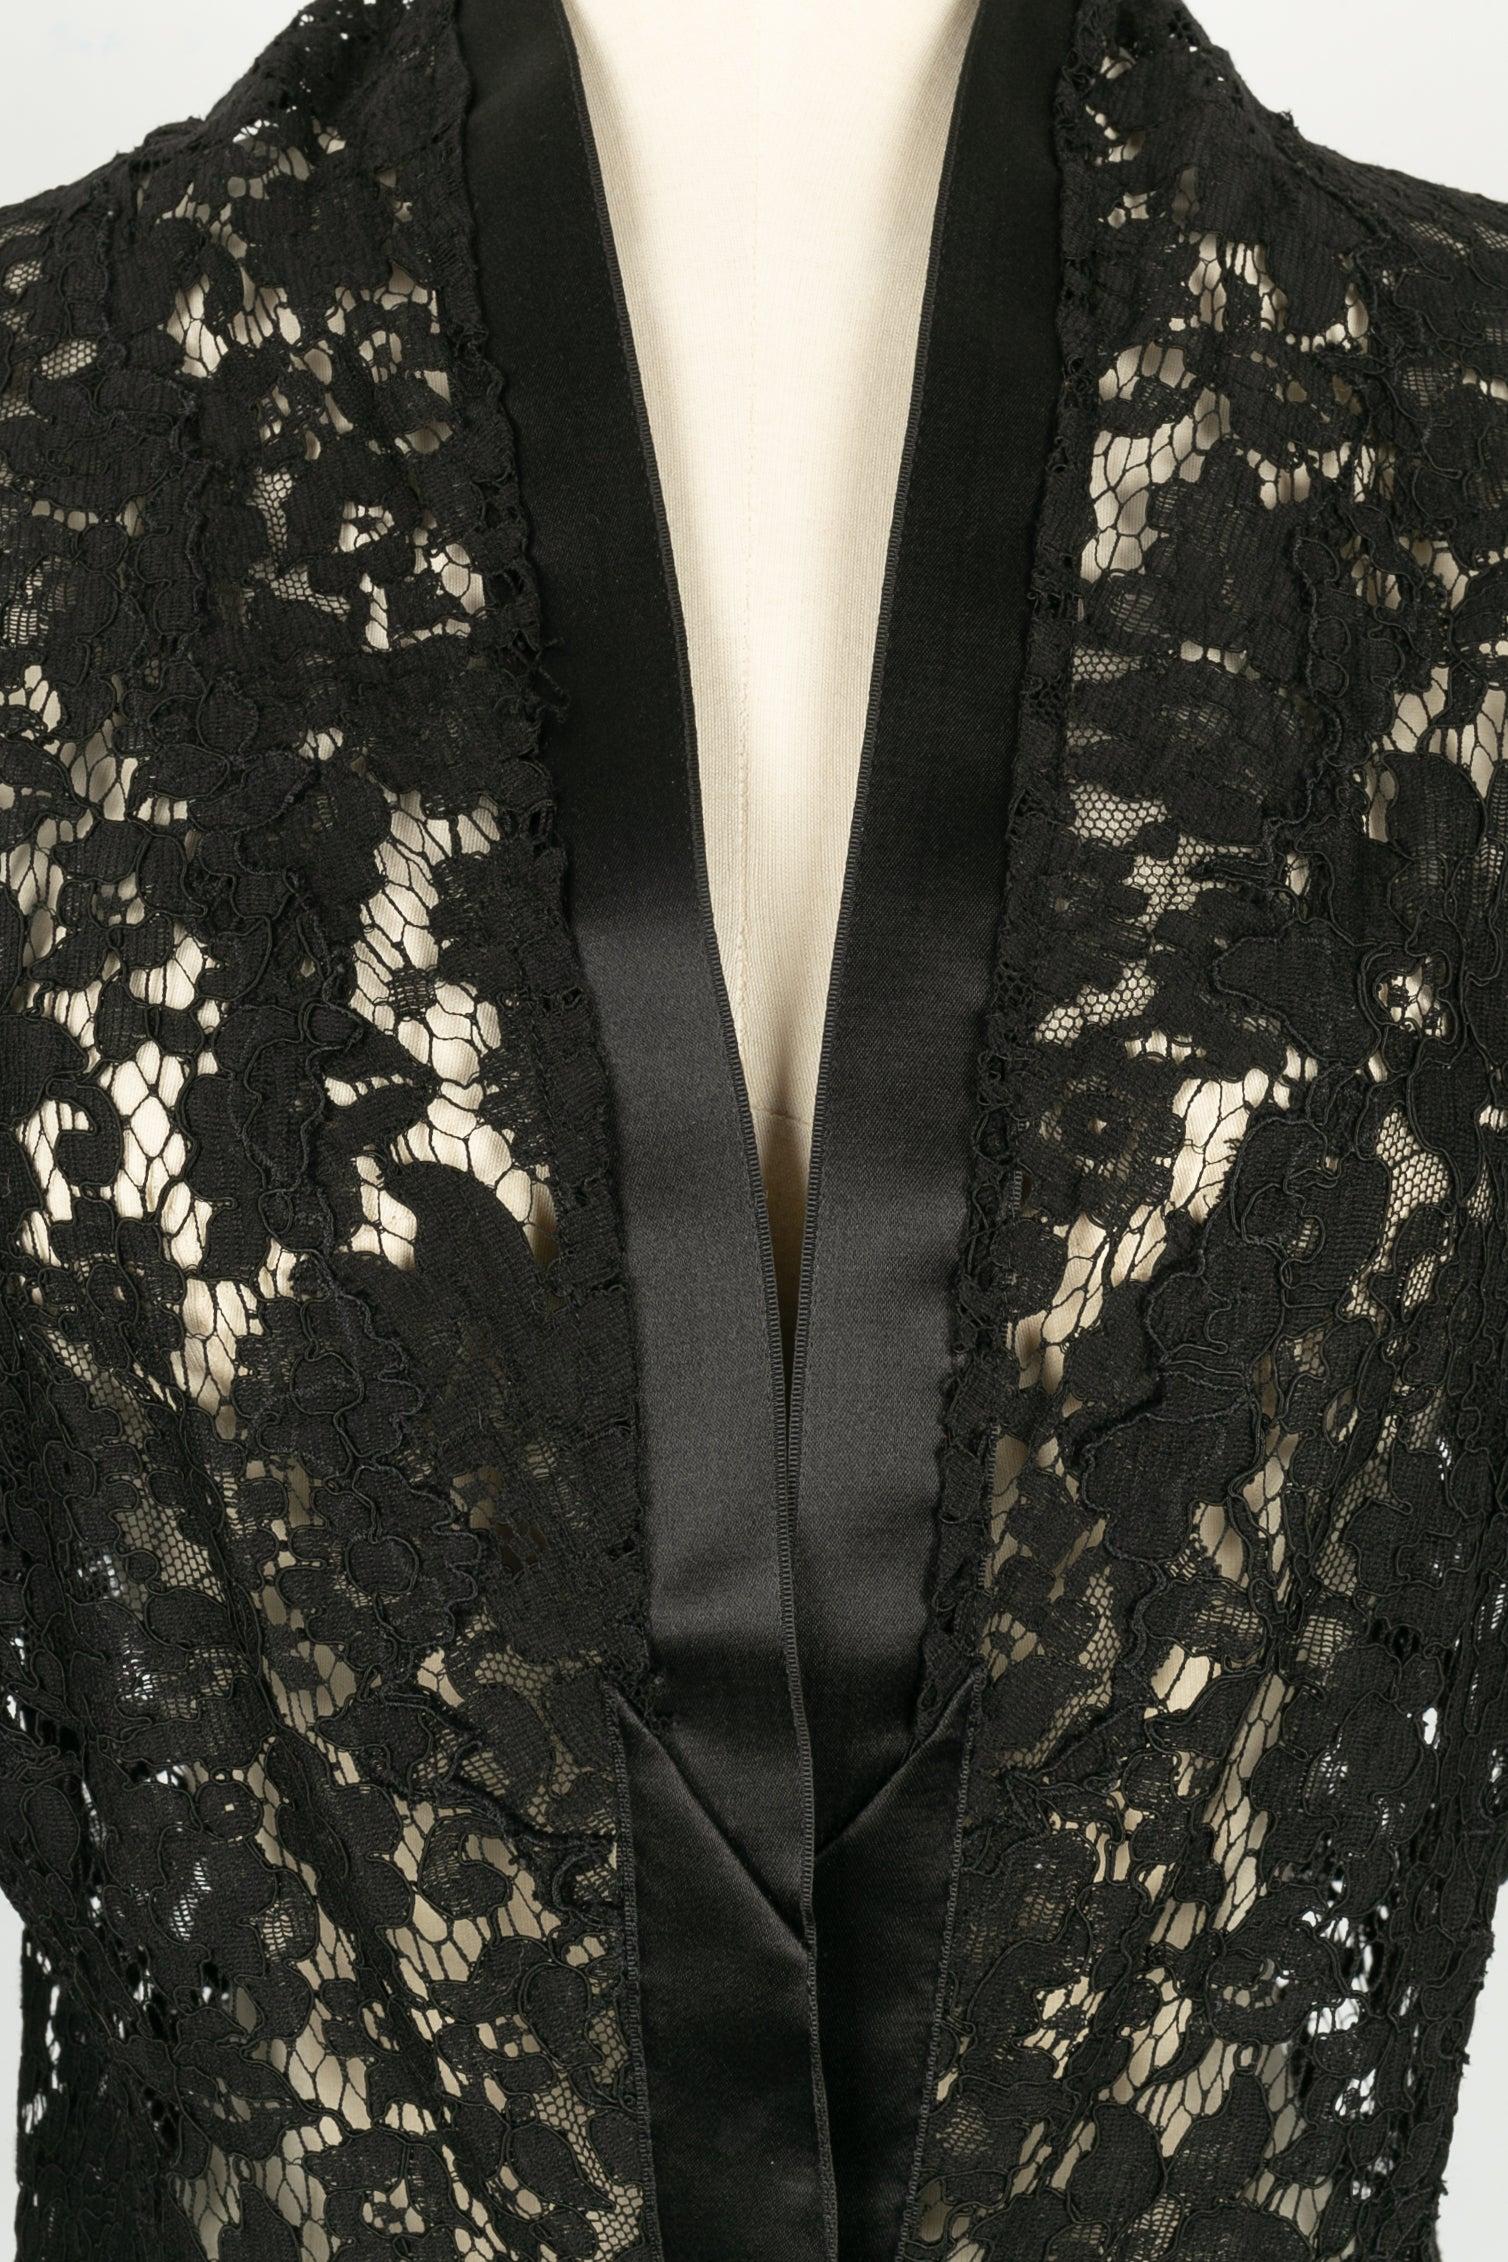 Chanel Black Lace and Silk Set For Sale 11